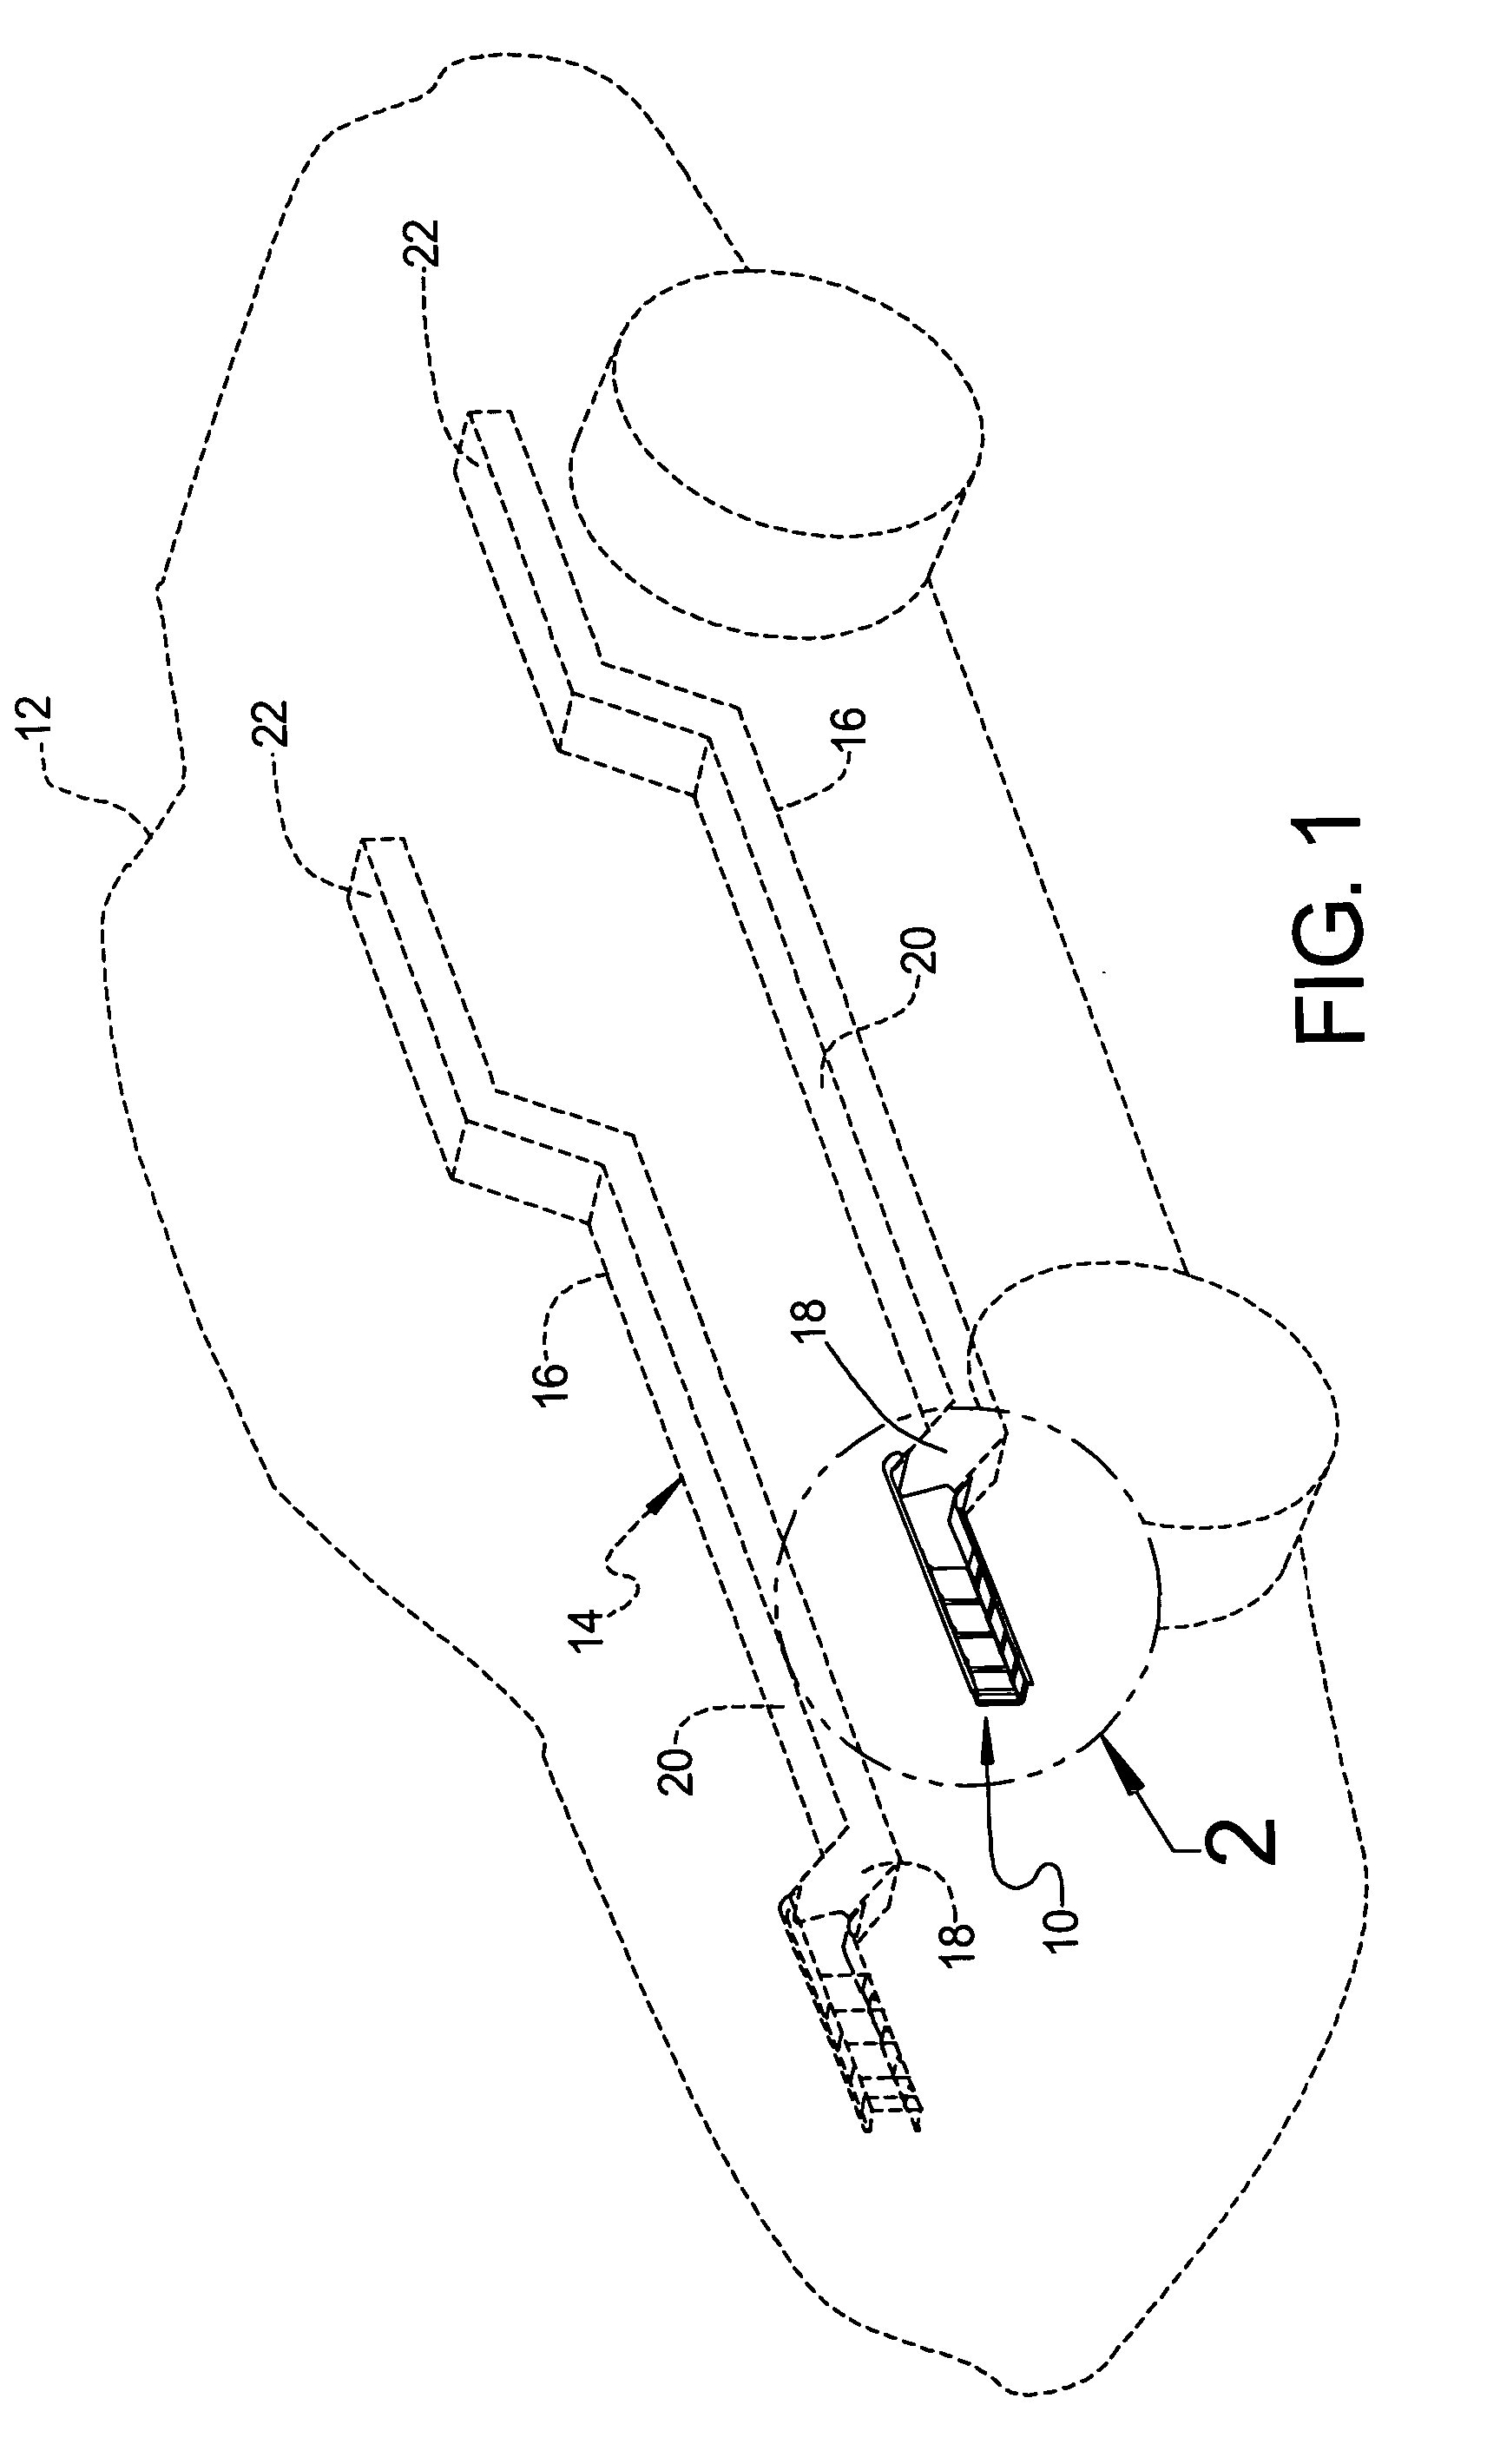 Structural assembly for vehicles